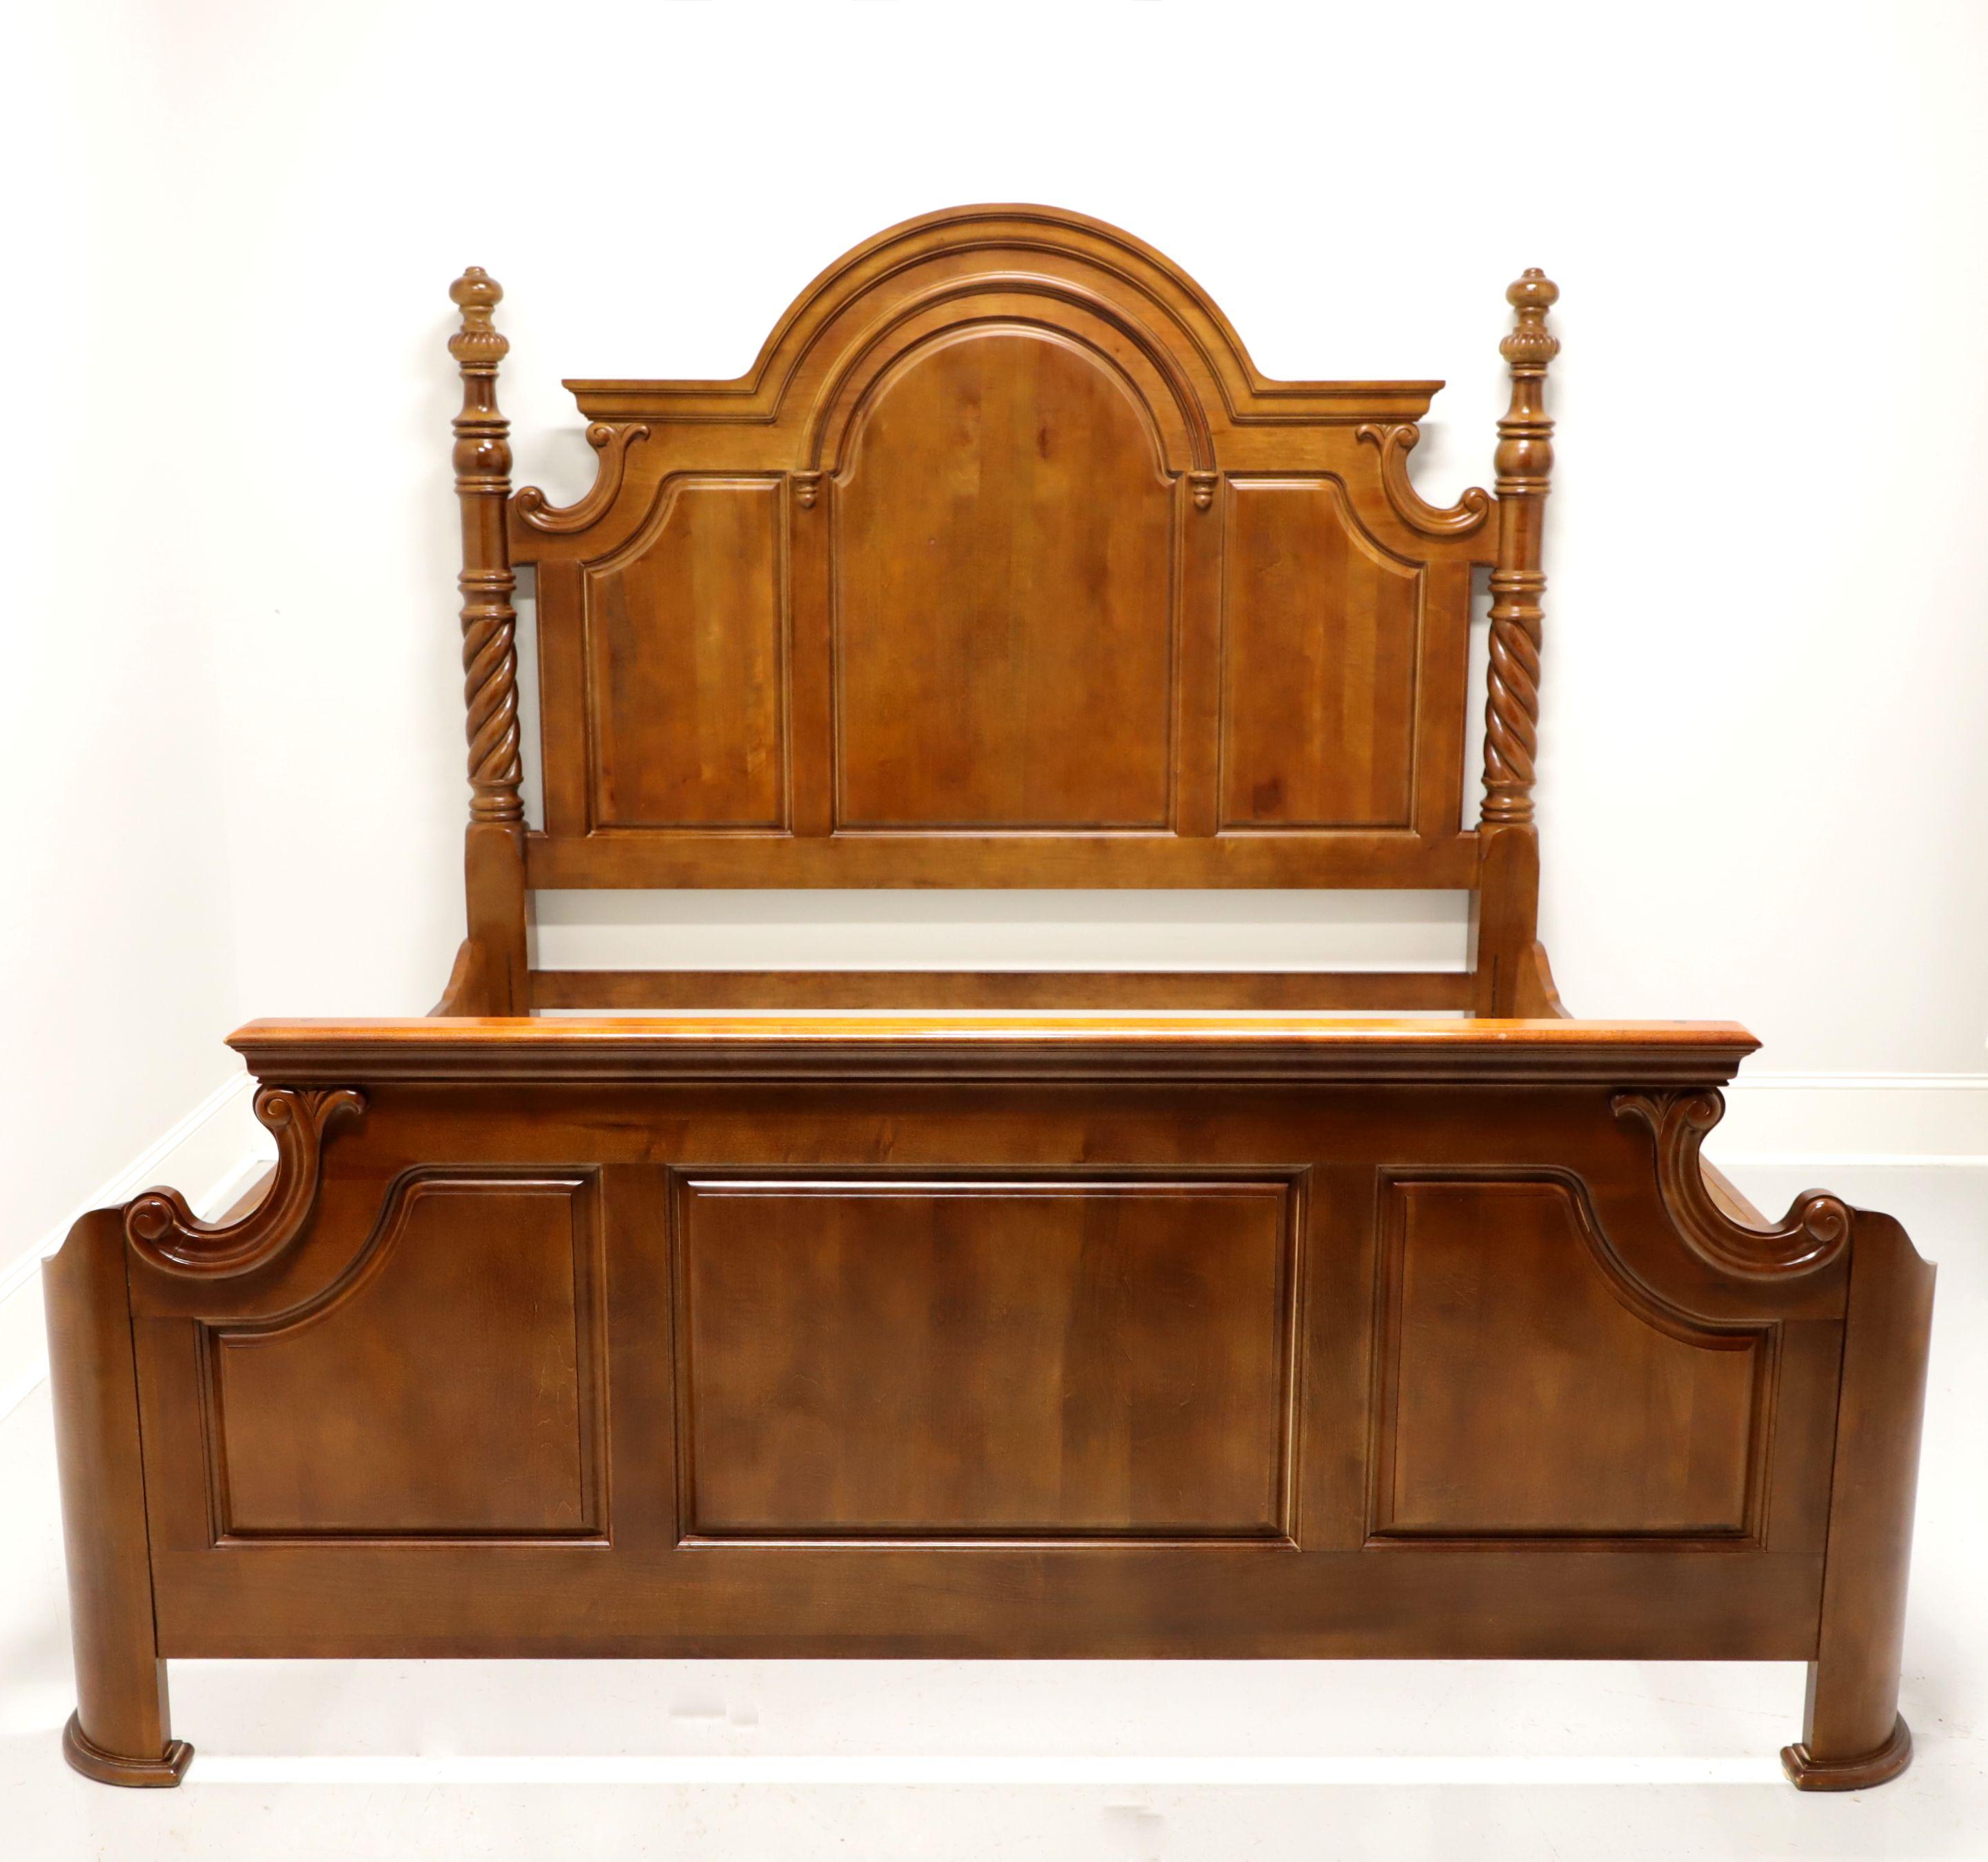 A king size panel bed in the Victorian style, unbranded. Maple with veneers, an arced top with decoratively carved & barley twist posts to headboard, curved inward footboard to attach to side rails and decoratively carved scroll accents. No mattress